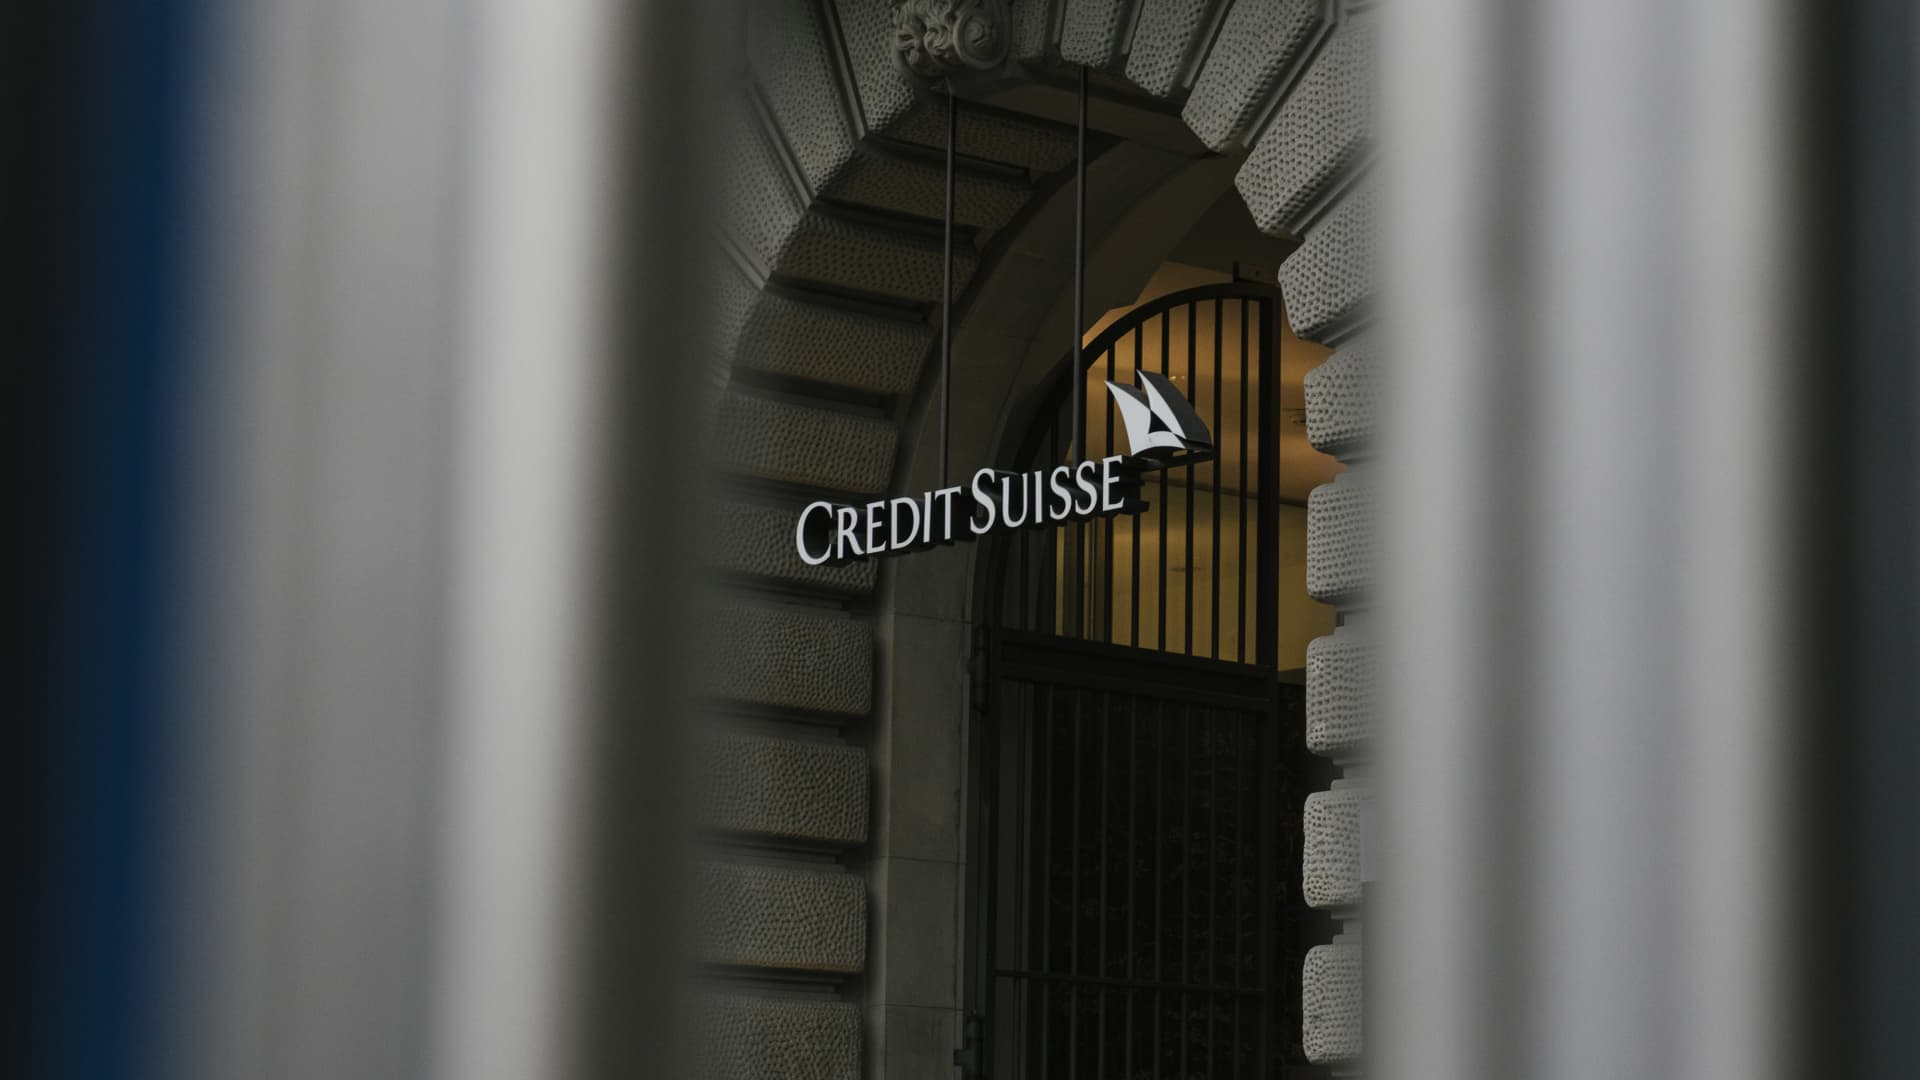 Credit Suisse issues profit warning for second quarter, citing Ukraine war and rate hikes